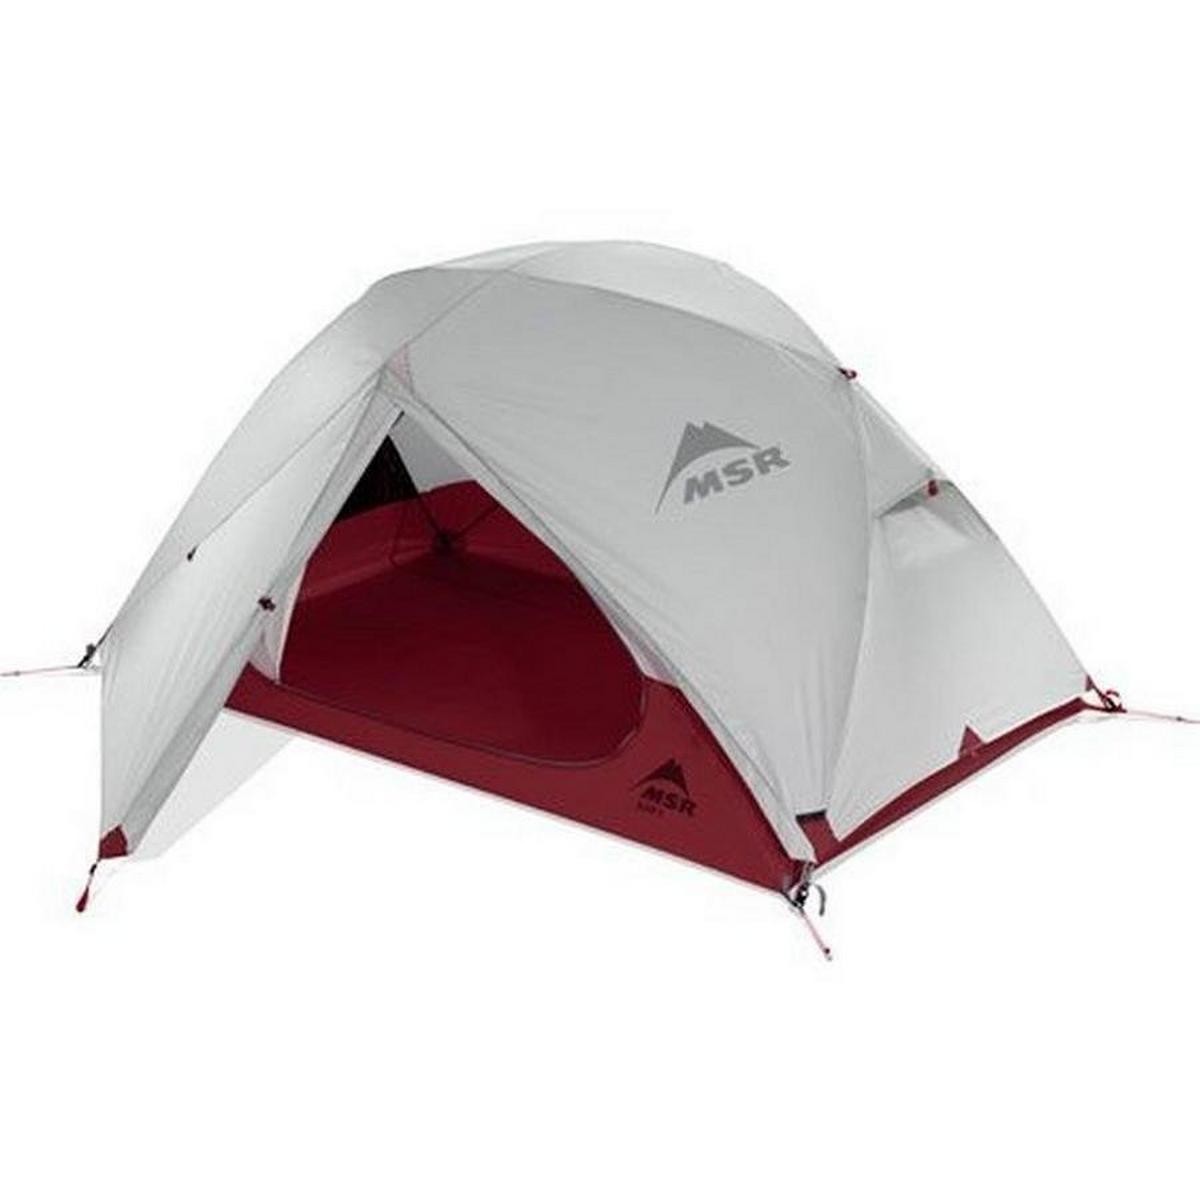 Elixir 2 Tent | Two Tent | George Fisher